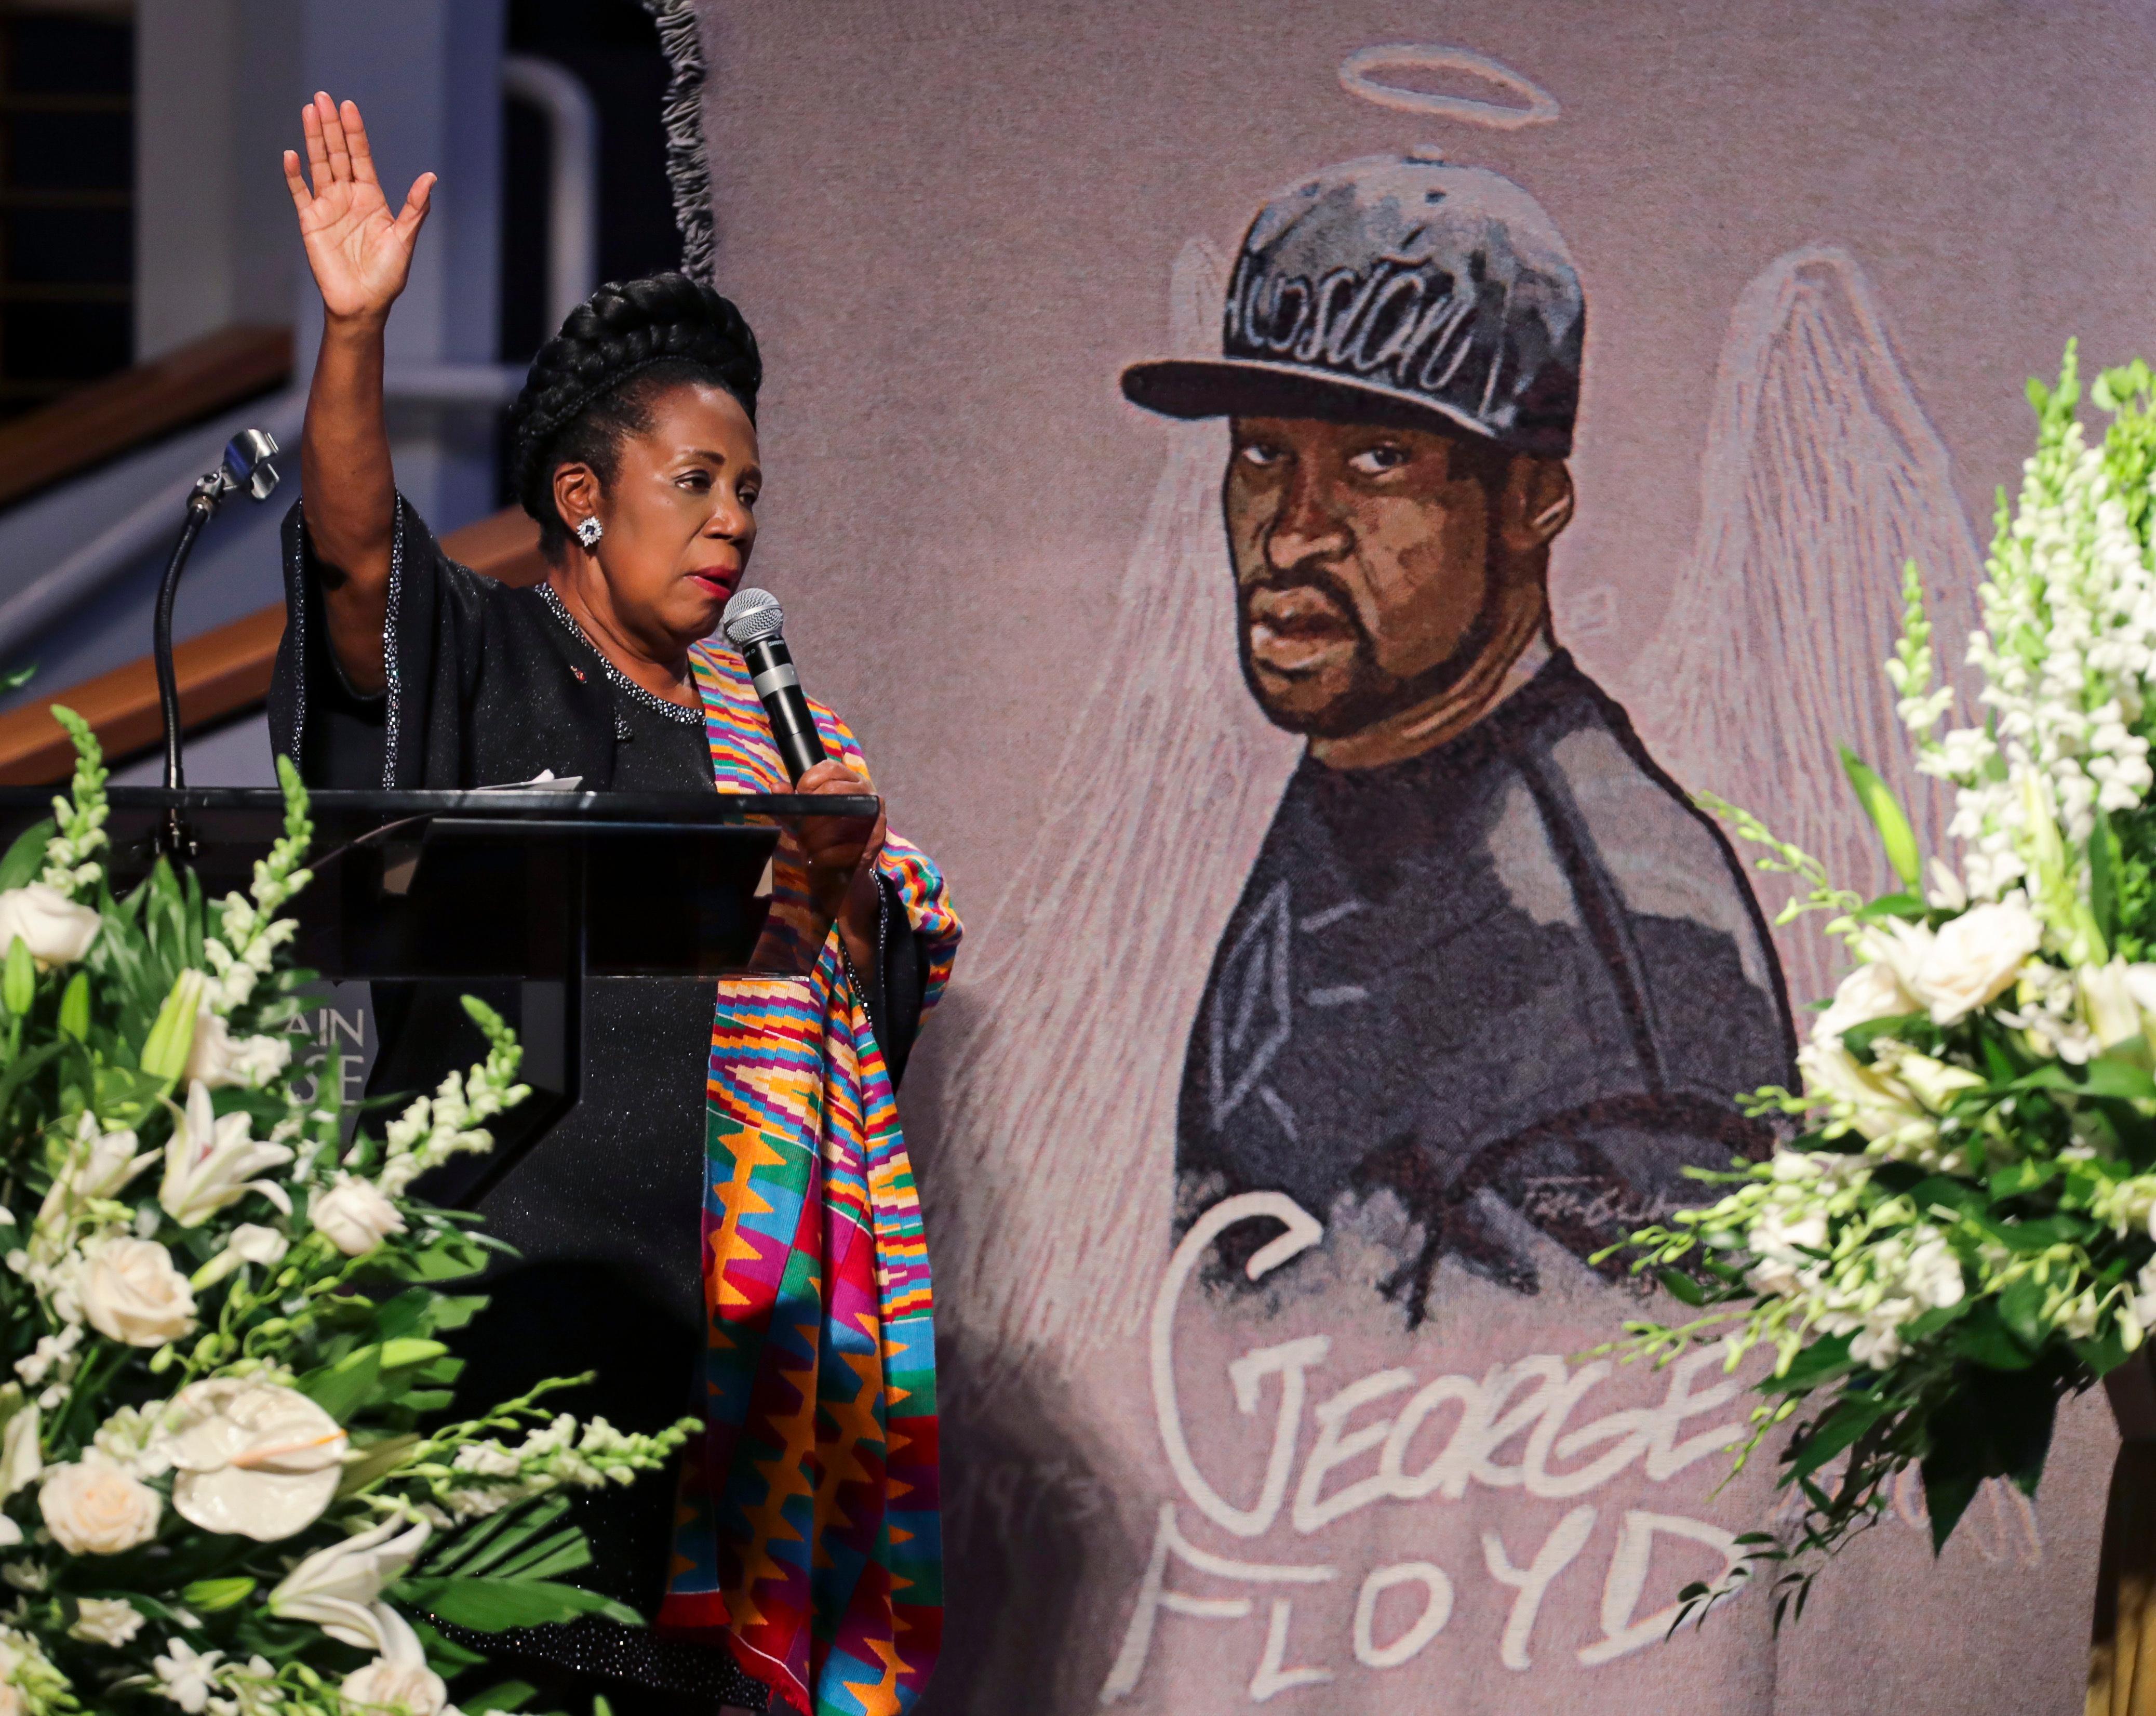 Congresswoman Sheila Jackson Lee speaks during the funeral for George Floyd on Tuesday, June 9, 2020, at The Fountain of Praise church in Houston. (Godofredo A. Vásquez/Houston Chronicle via AP, Pool)